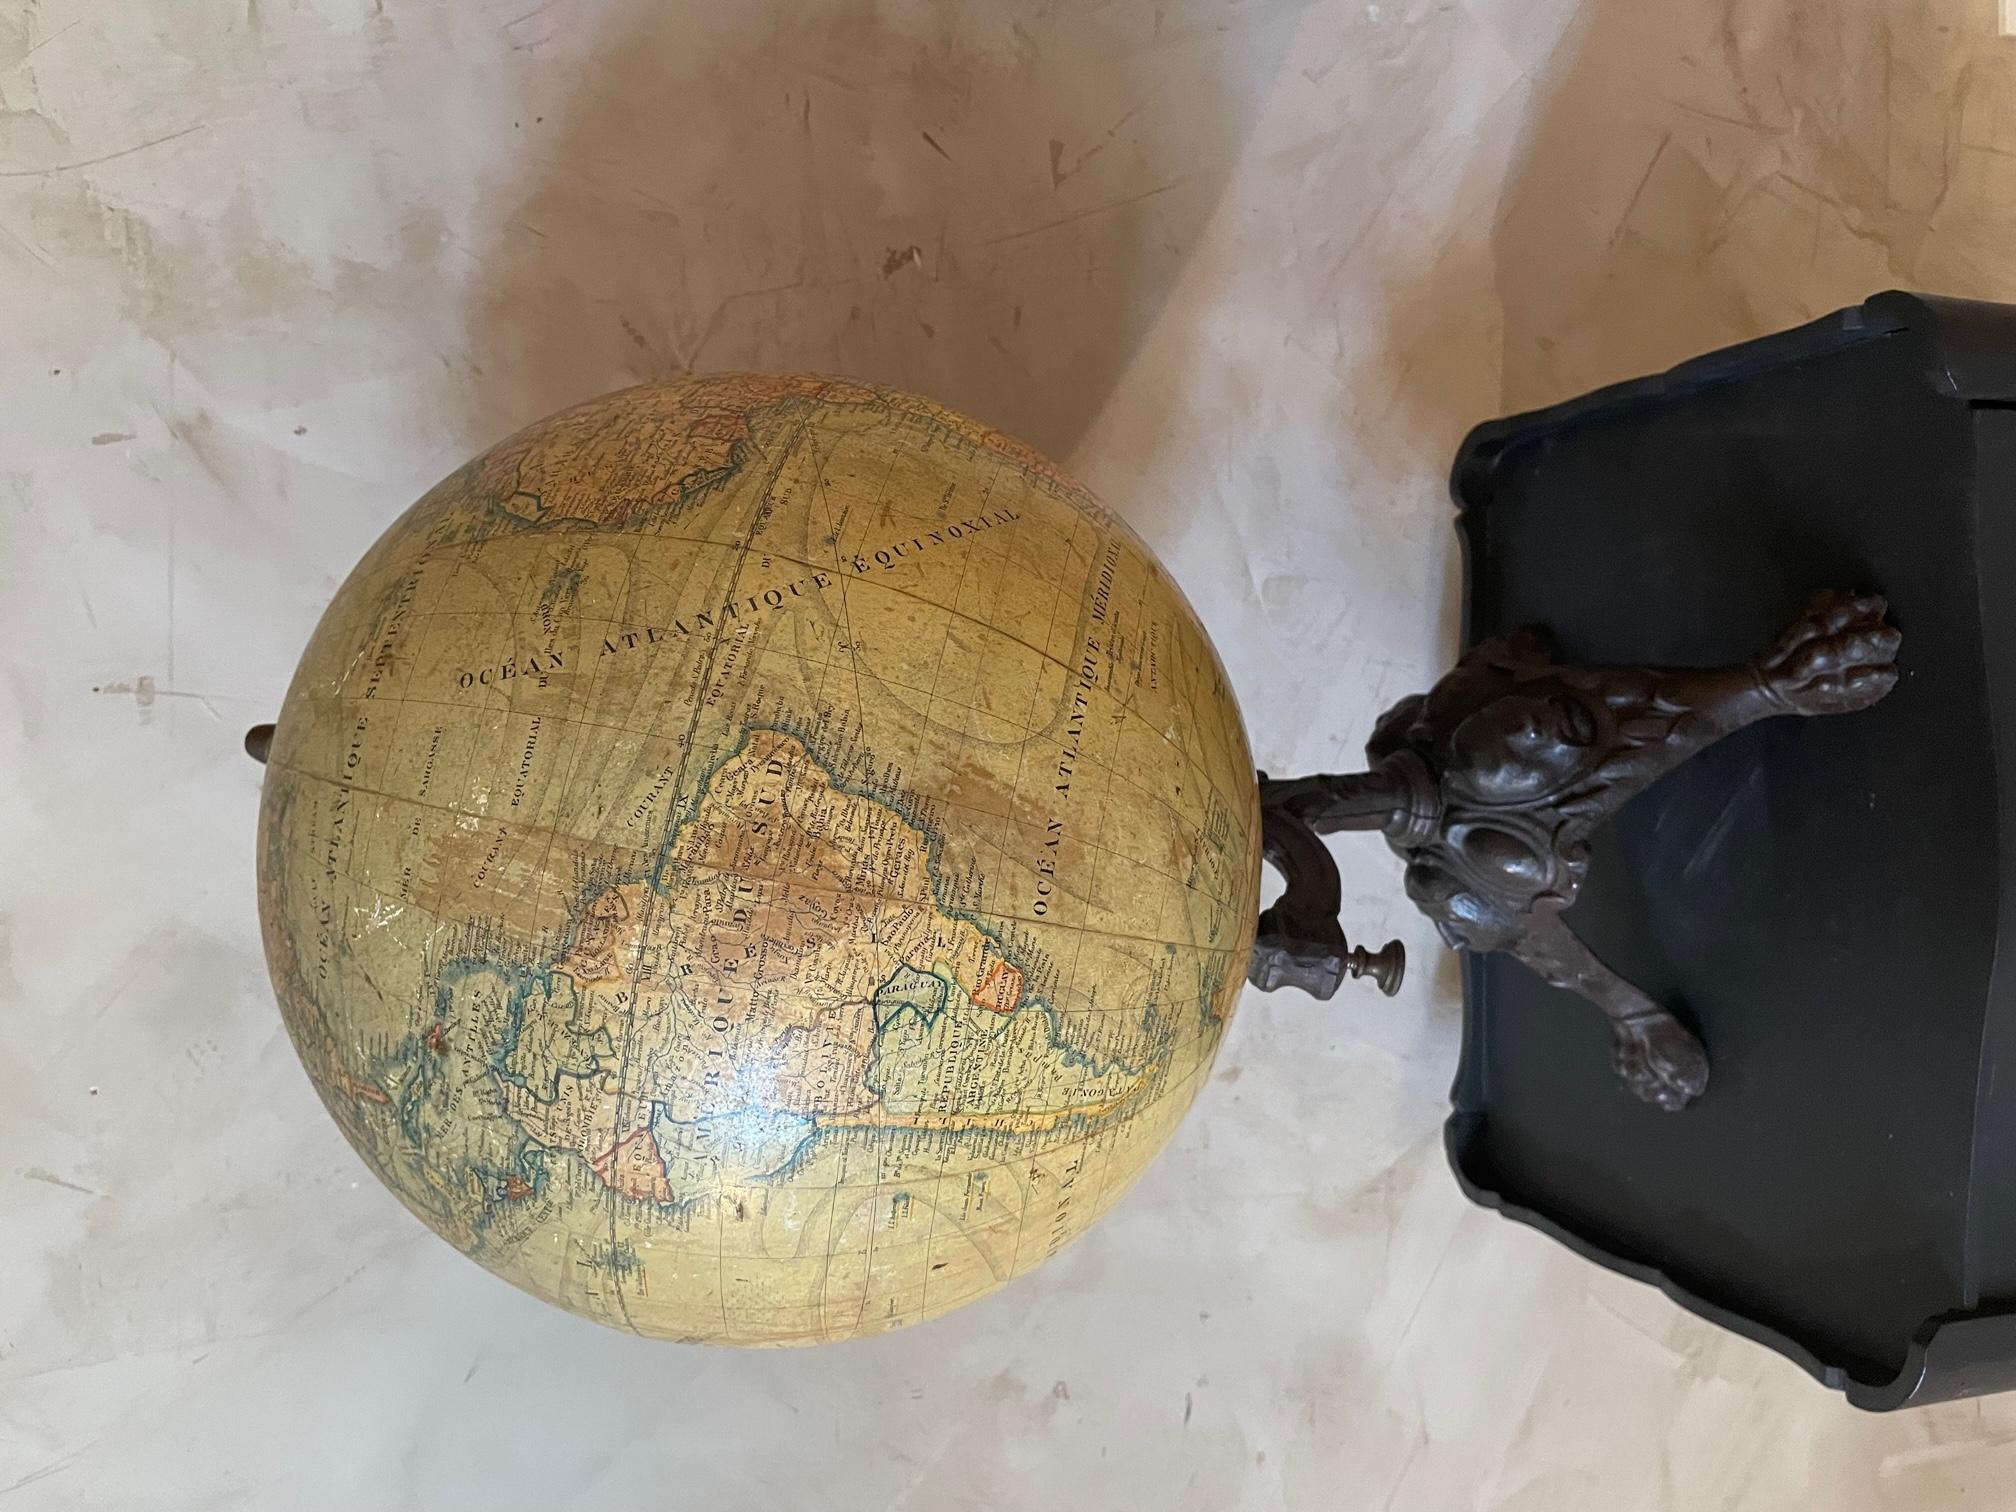 Exceptionnal 19th century French Paper and metal World globe from the 1880s. 
Stamp of the French manufacturer J.Lebegue & cie on the globe. 
The base in in metal and is representing the faces of three continents (Africa, America and Asia).
Some